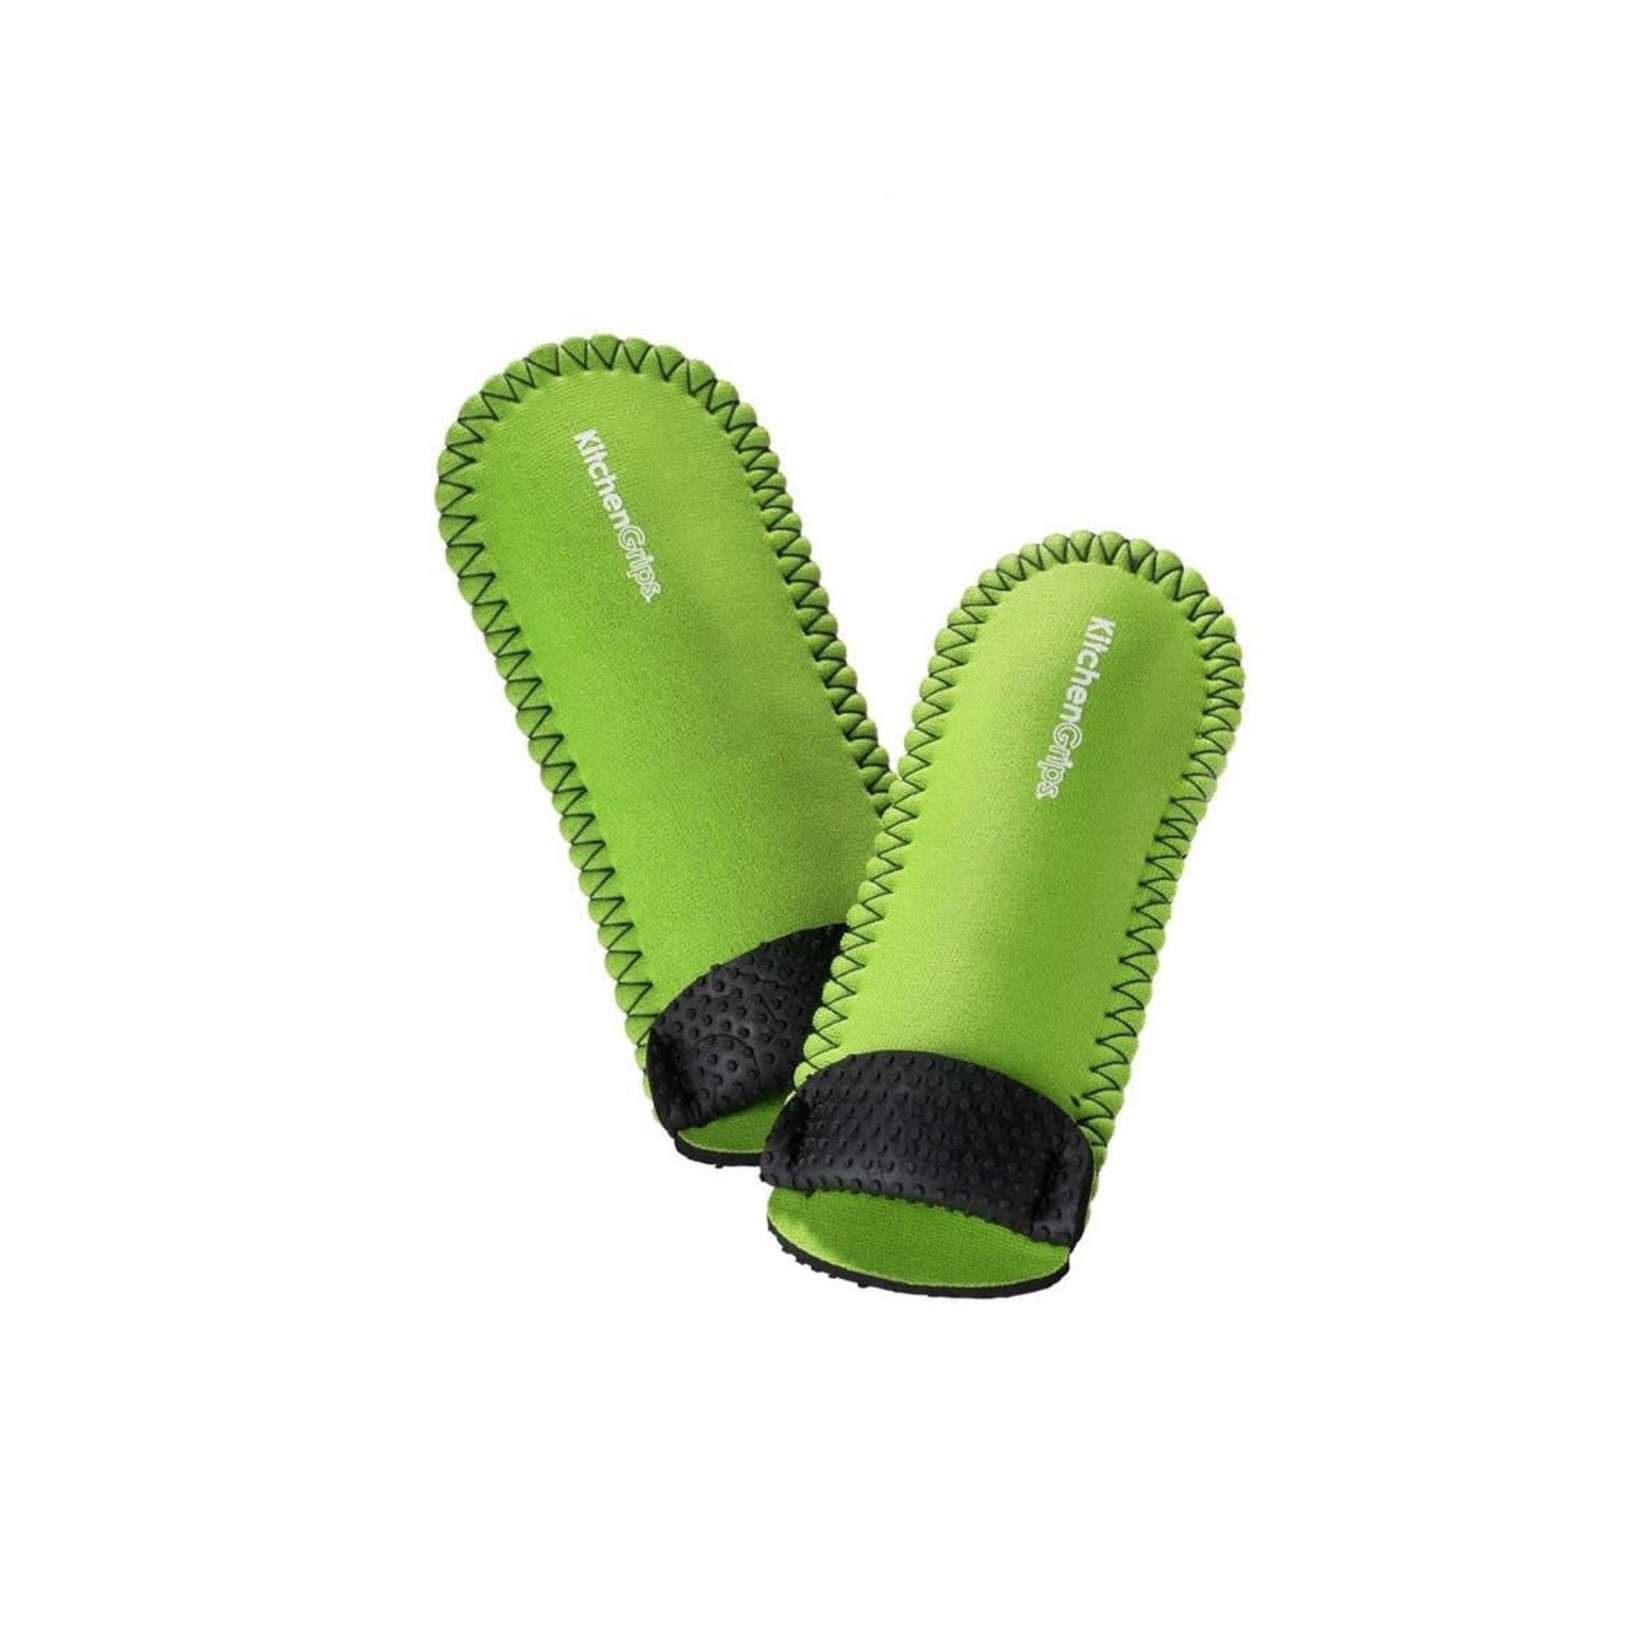 KITCHEN GRIPS KITCHEN GRIPS Deluxe Pan Holder 2pc - Lime / Black